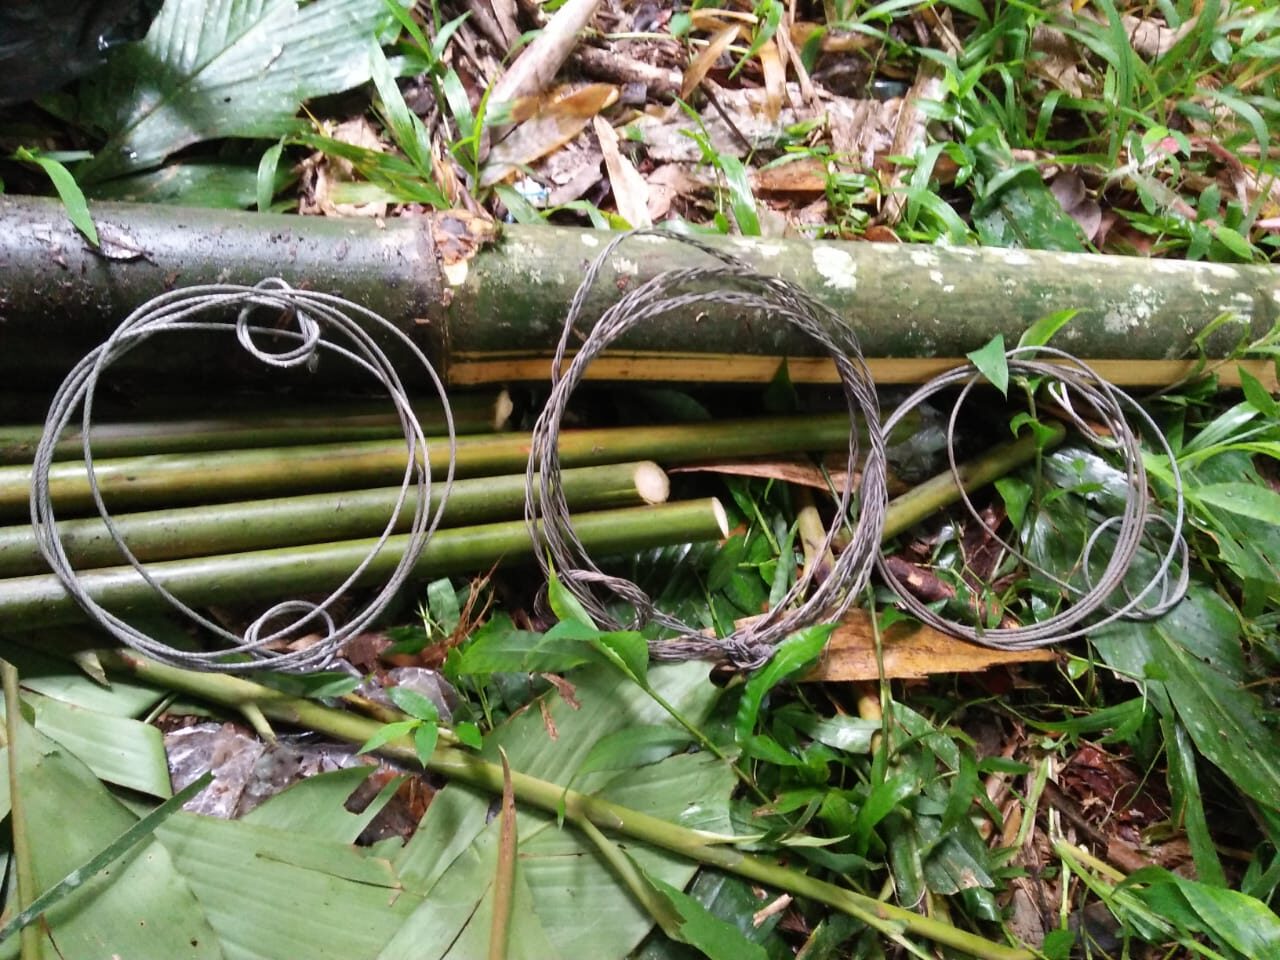 FFI KSNP wire cable snares recorded June 2022